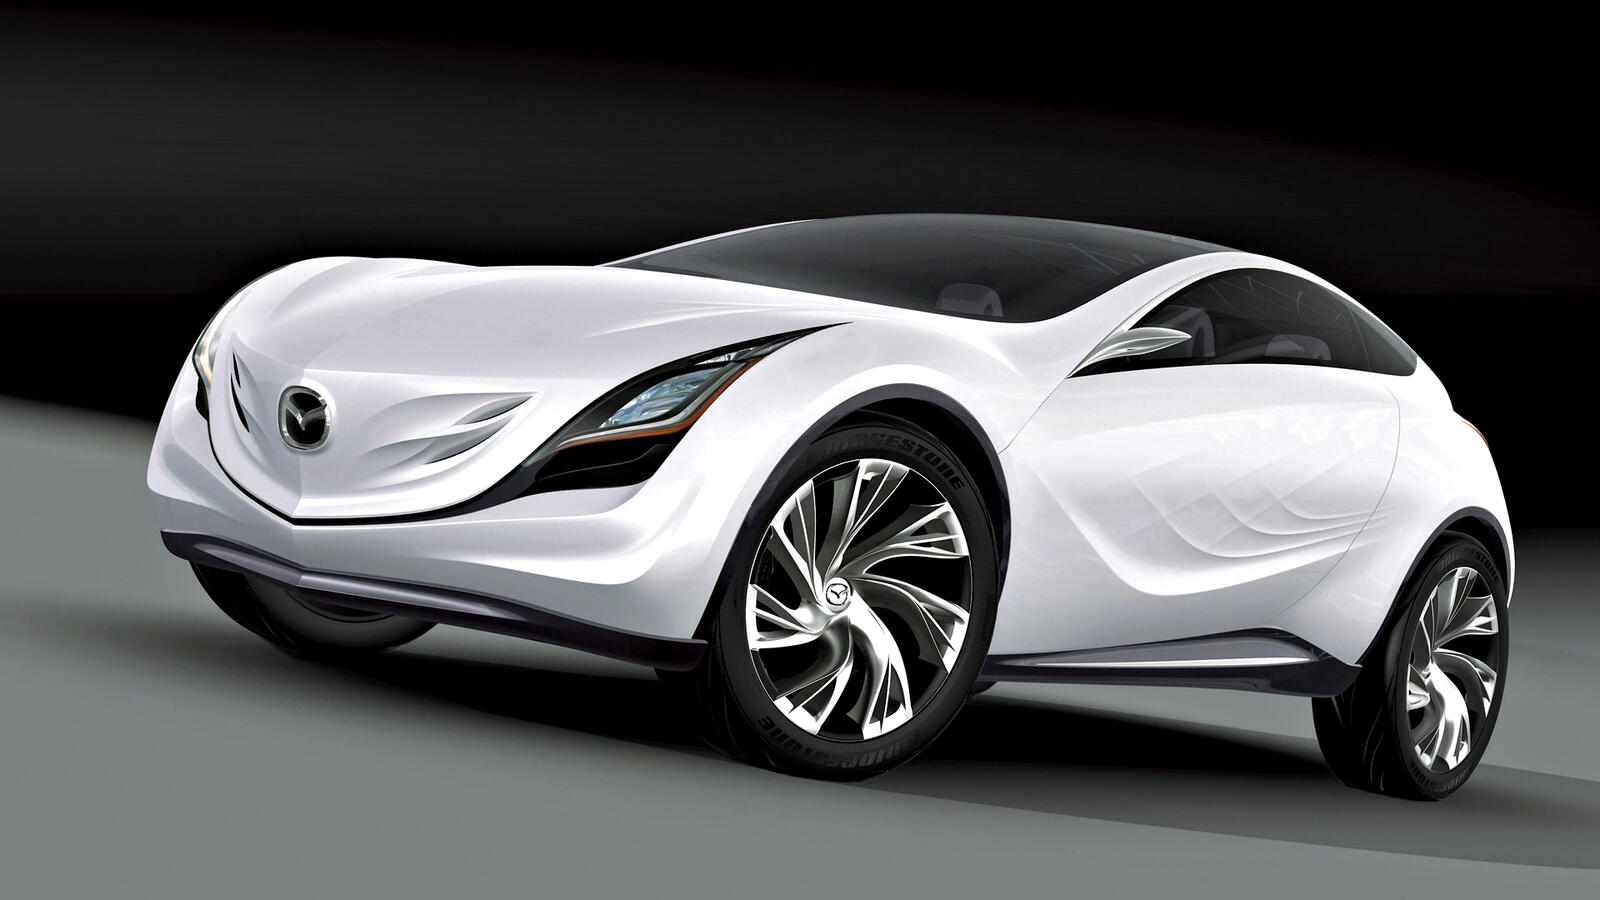 Wallpapers Mazda white concept car on the desktop